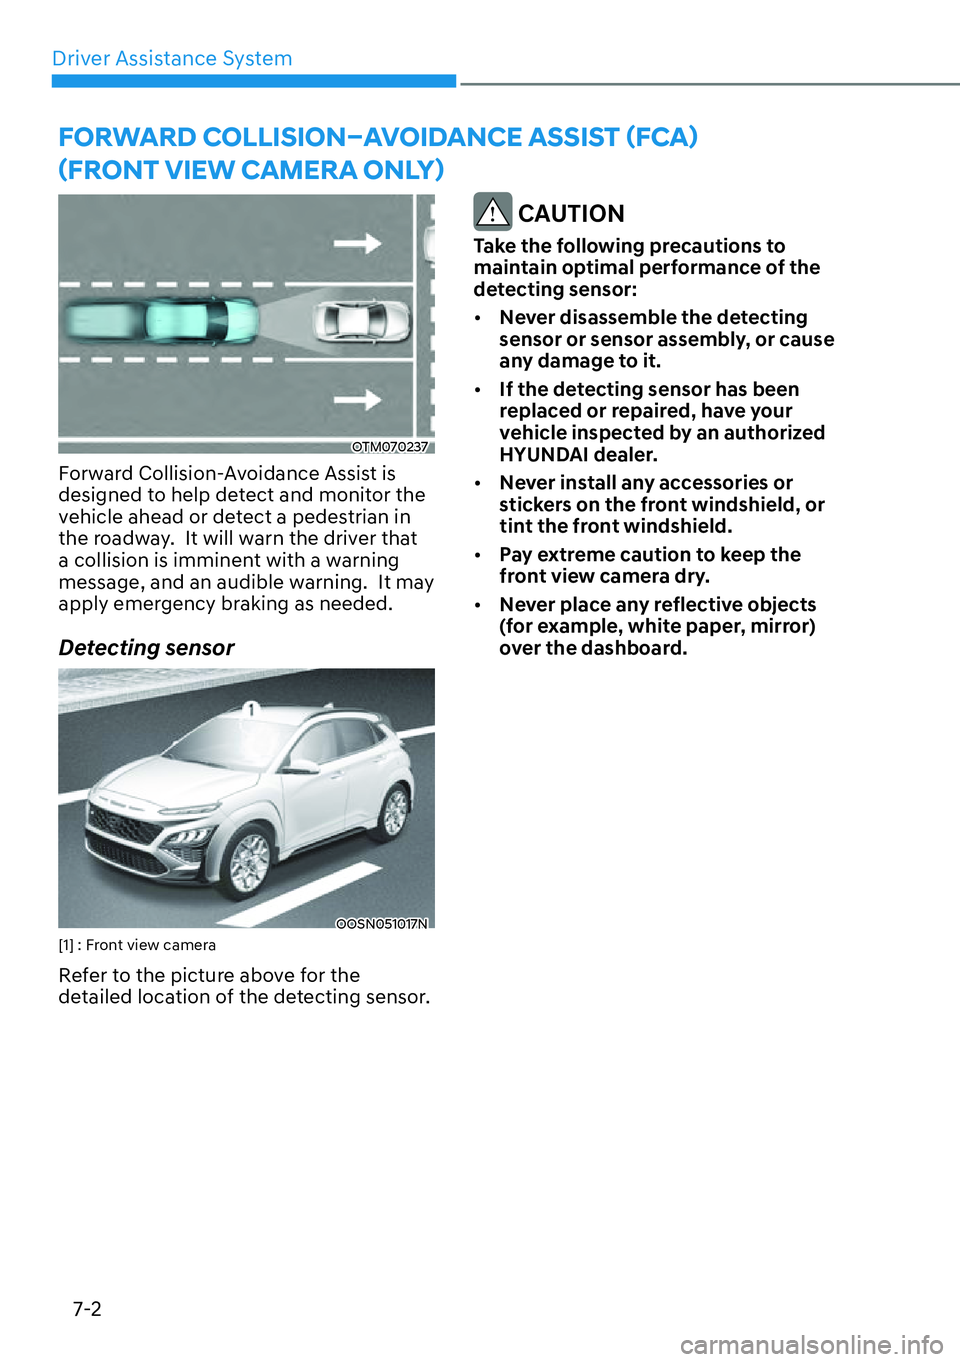 HYUNDAI KONA 2023  Owners Manual Driver Assistance System7-2
OTM070237
Forward Collision-Avoidance Assist is 
designed to help detect and monitor the 
vehicle ahead or detect a pedestrian in 
the roadway.  It will warn the driver tha